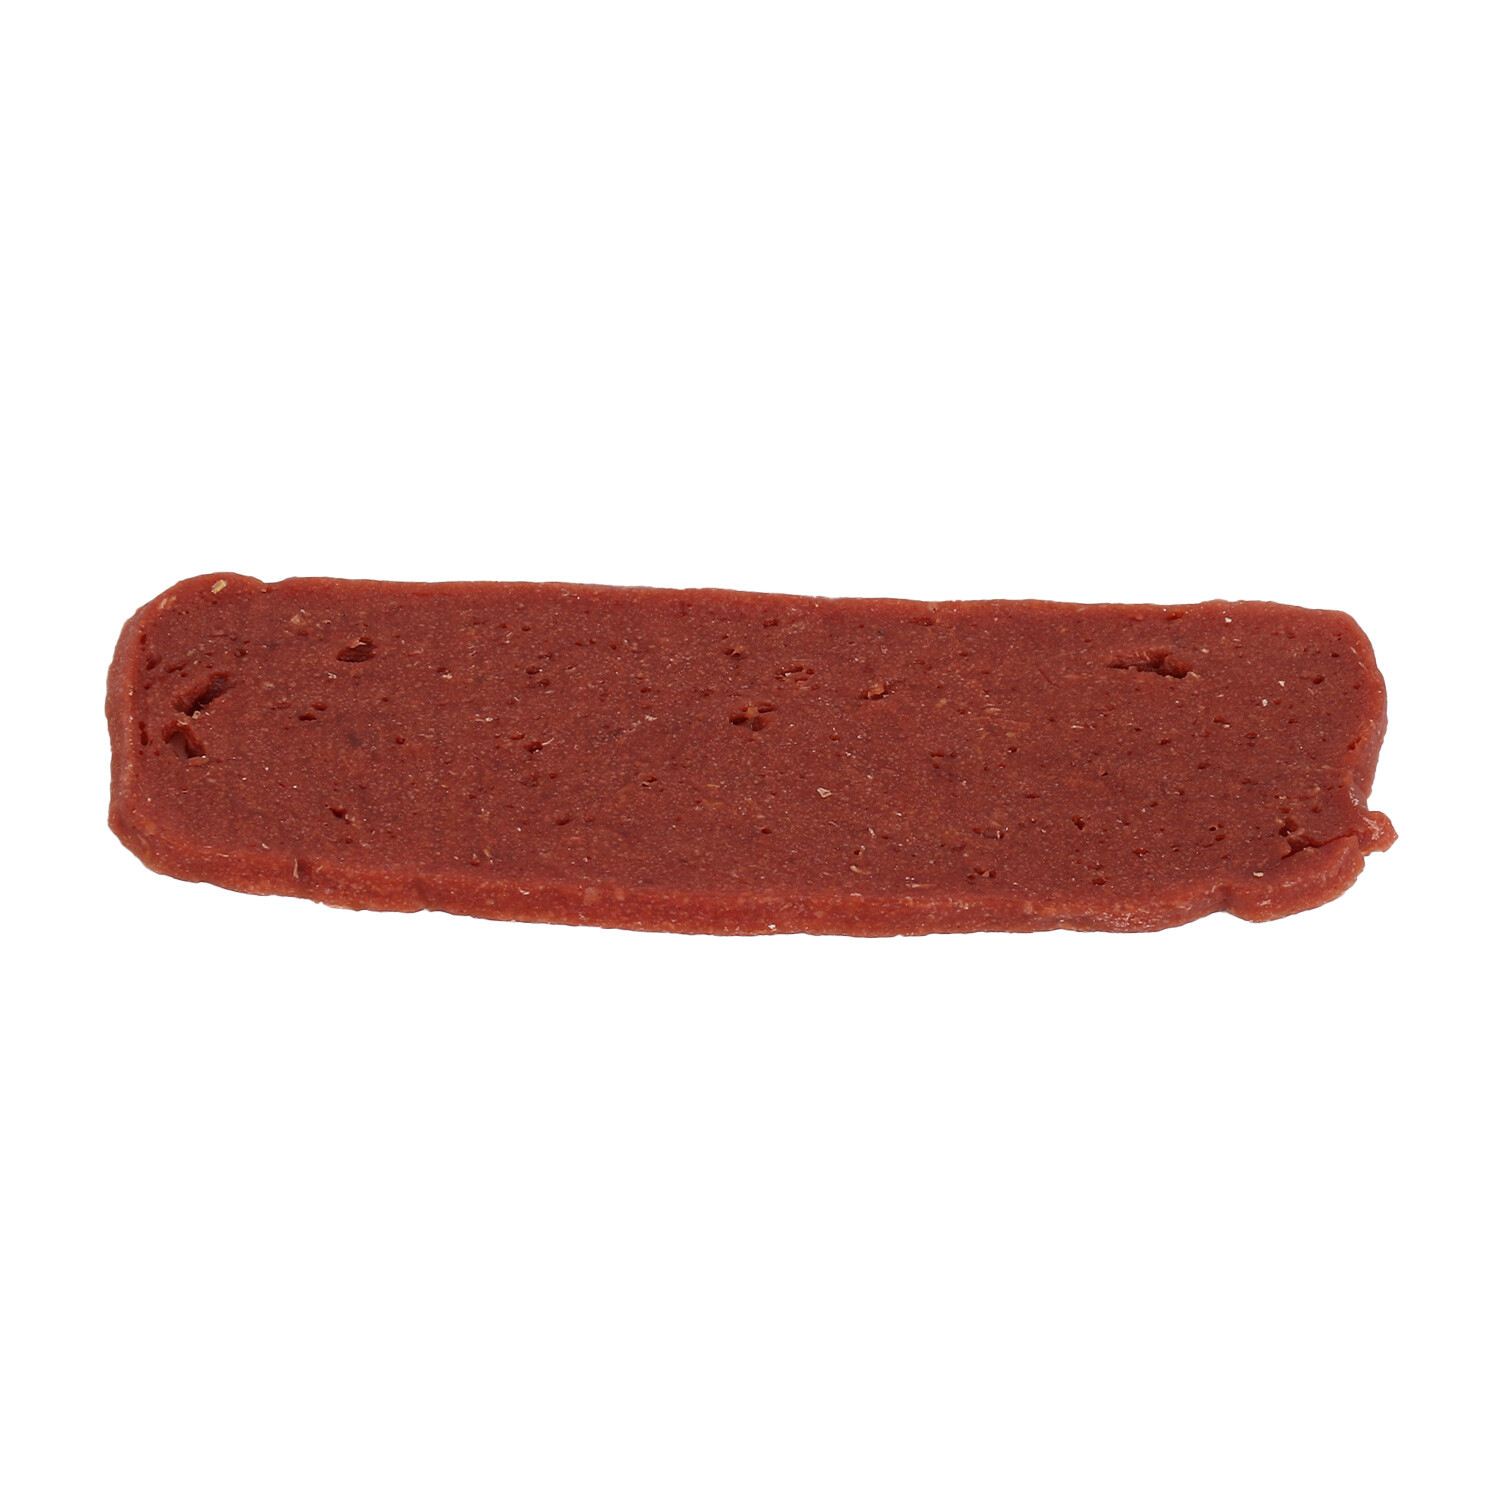 Clever Paws Lamb Fillets Dog Treat 80g Image 2